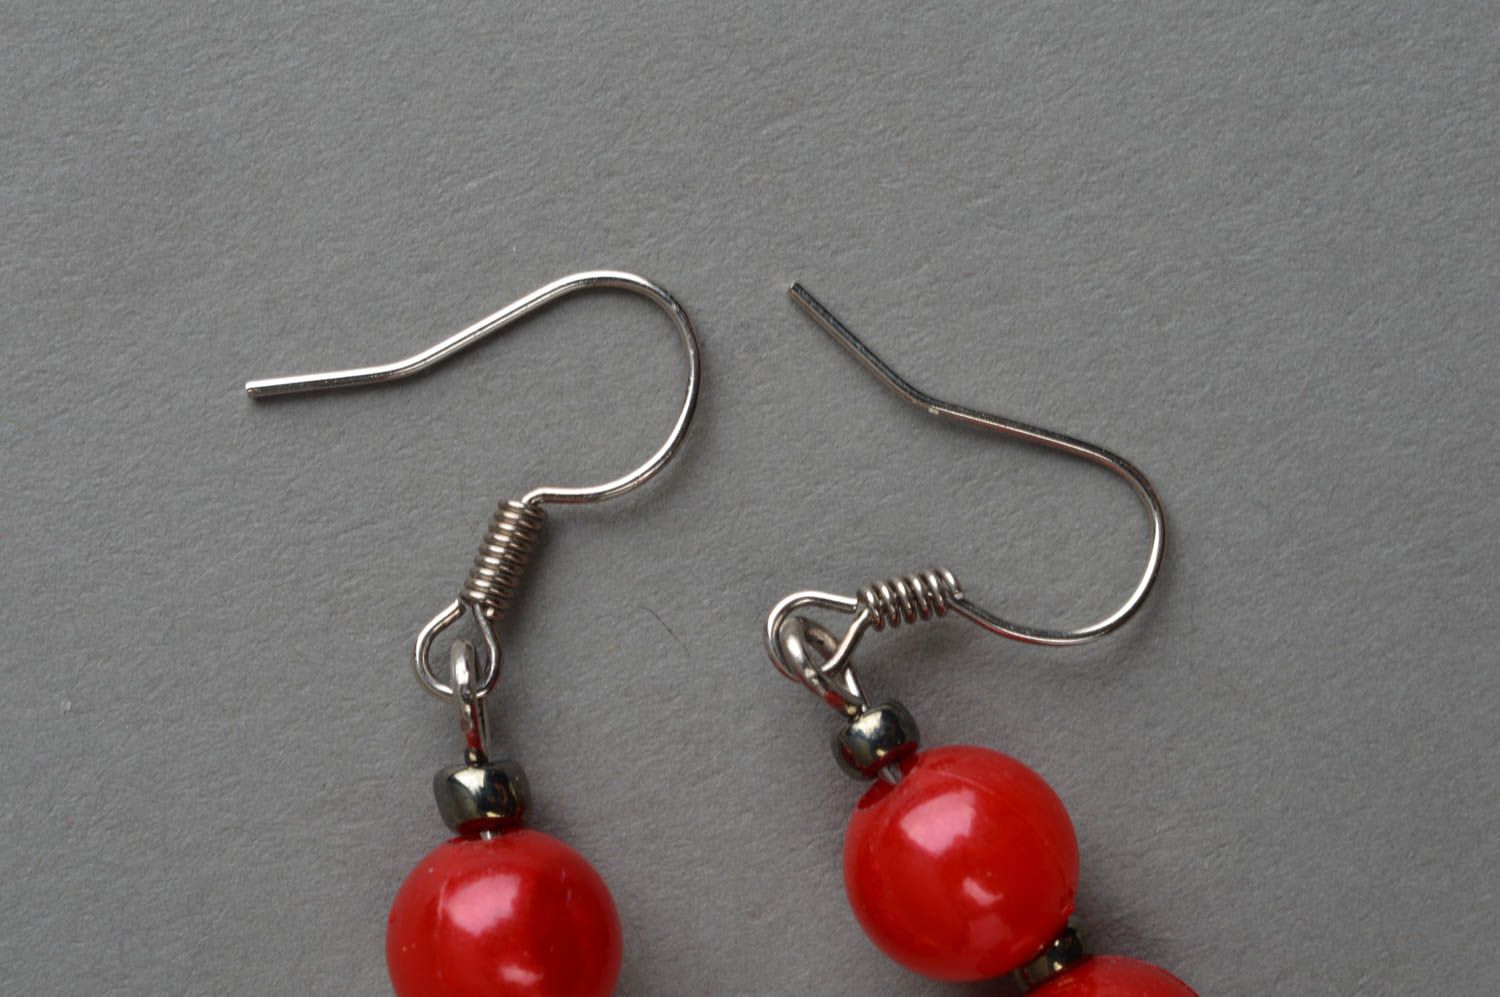 Handmade beaded red earrings jewelry for every day stylish unusual presents photo 2